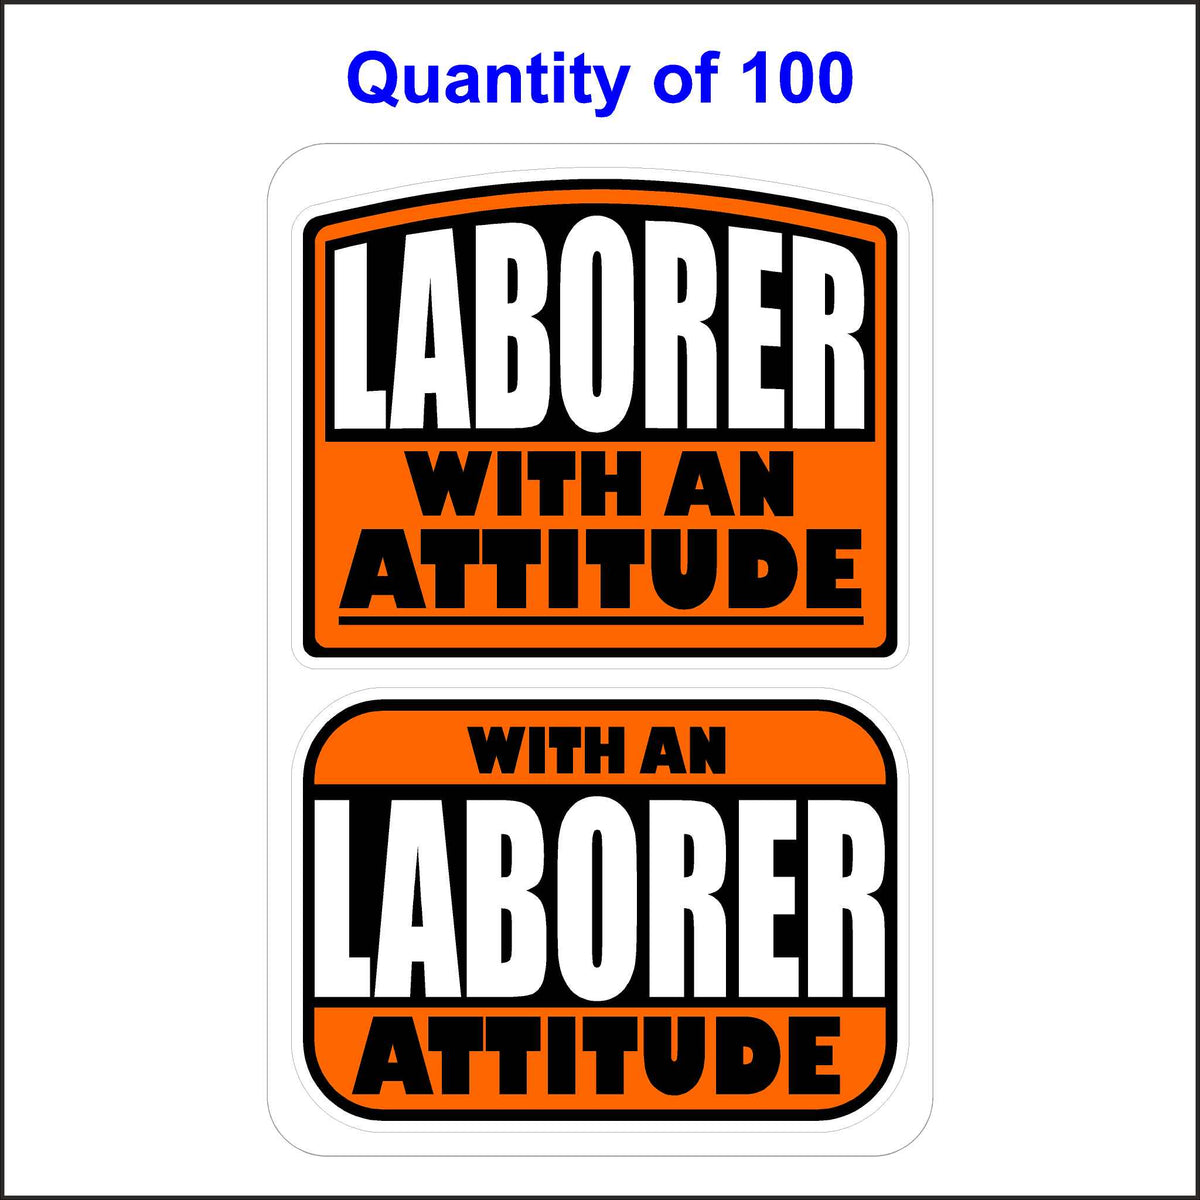 Laborer With An Attitude Stickers 100 Quantity.